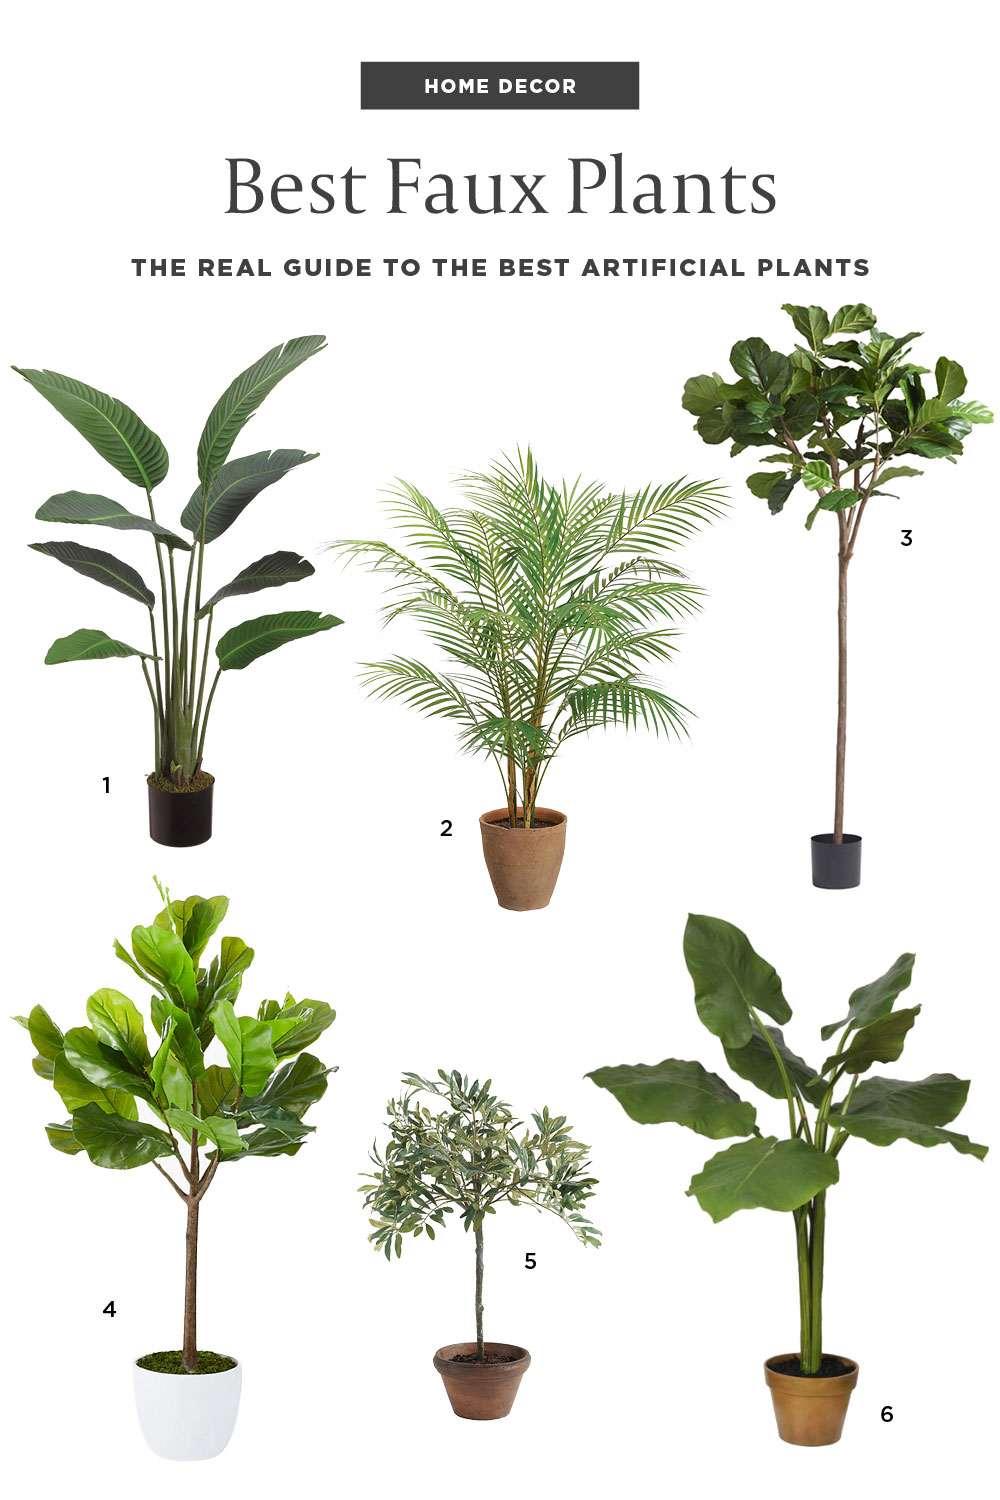 Where To Buy The Best Faux Plants 2021 Home Decor